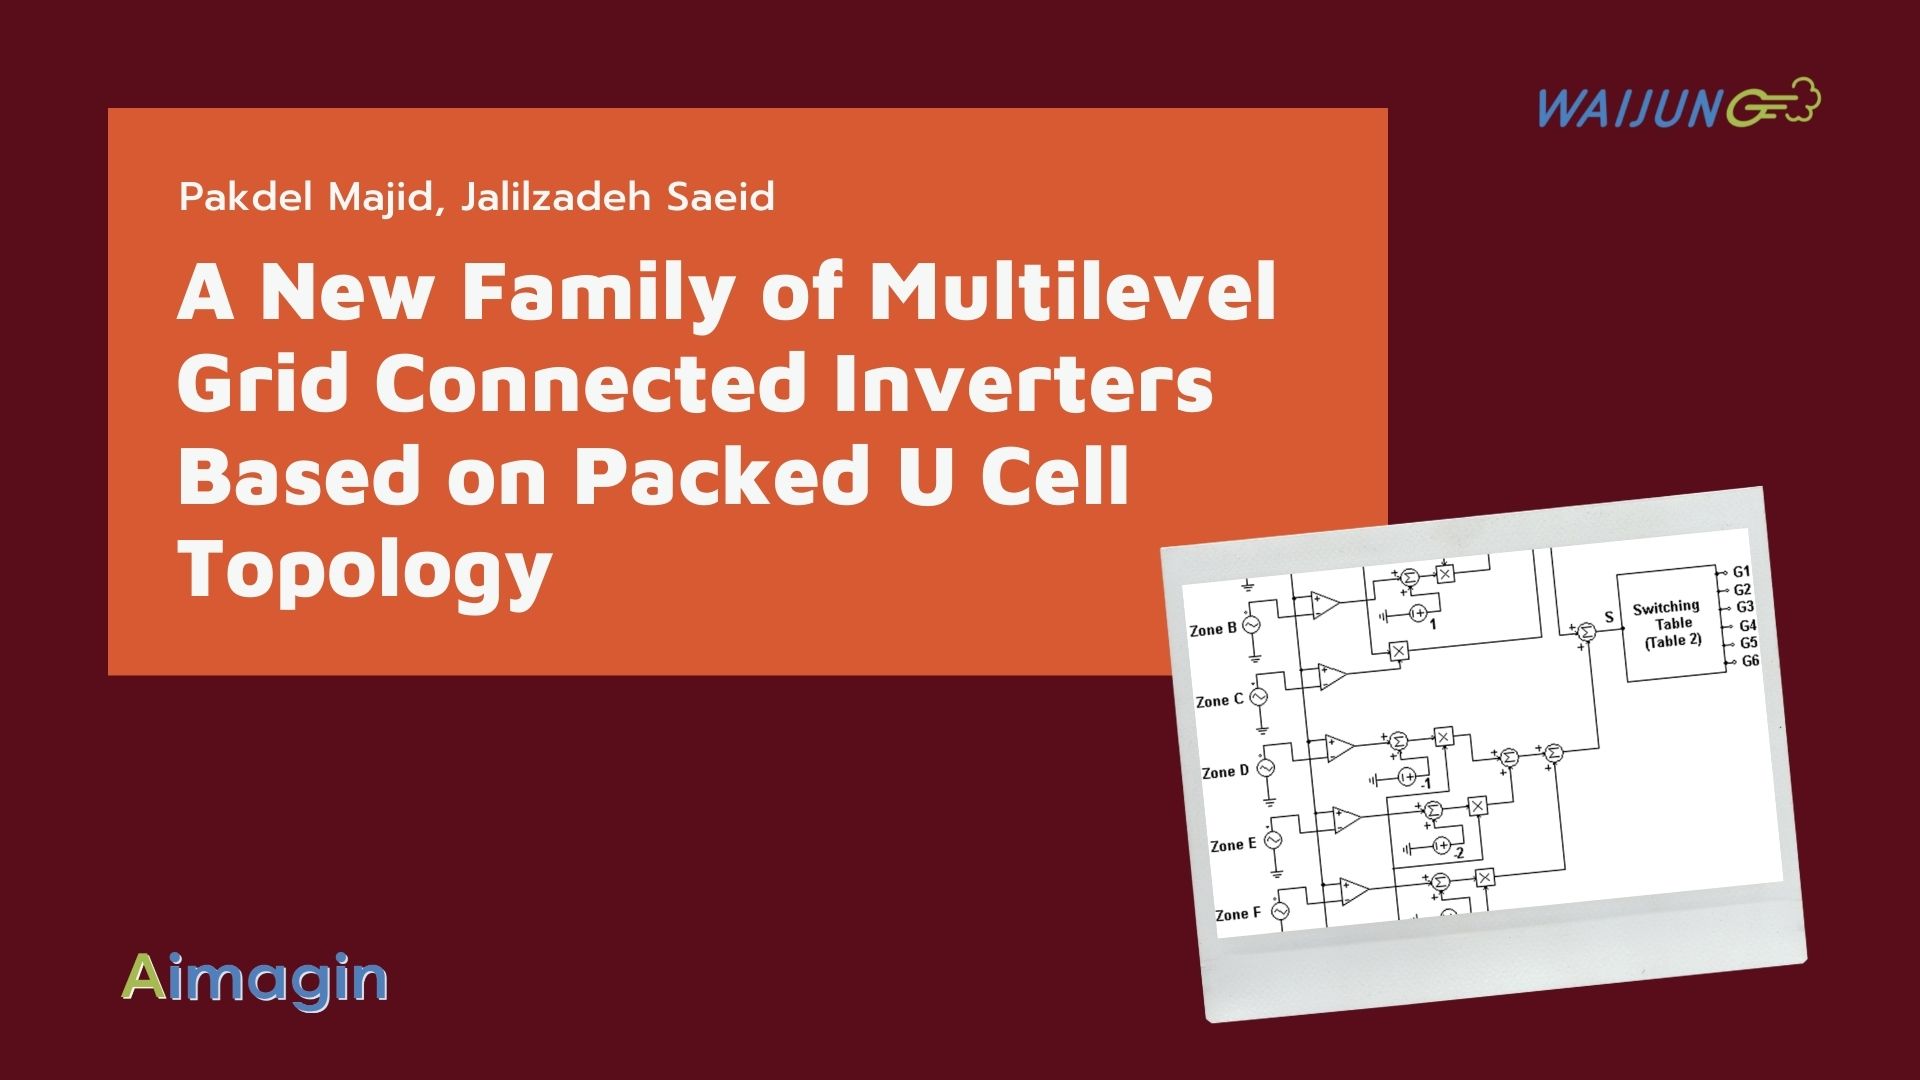 A New Family of Multilevel Grid Connected Inverters Based on Packed U Cell Topology